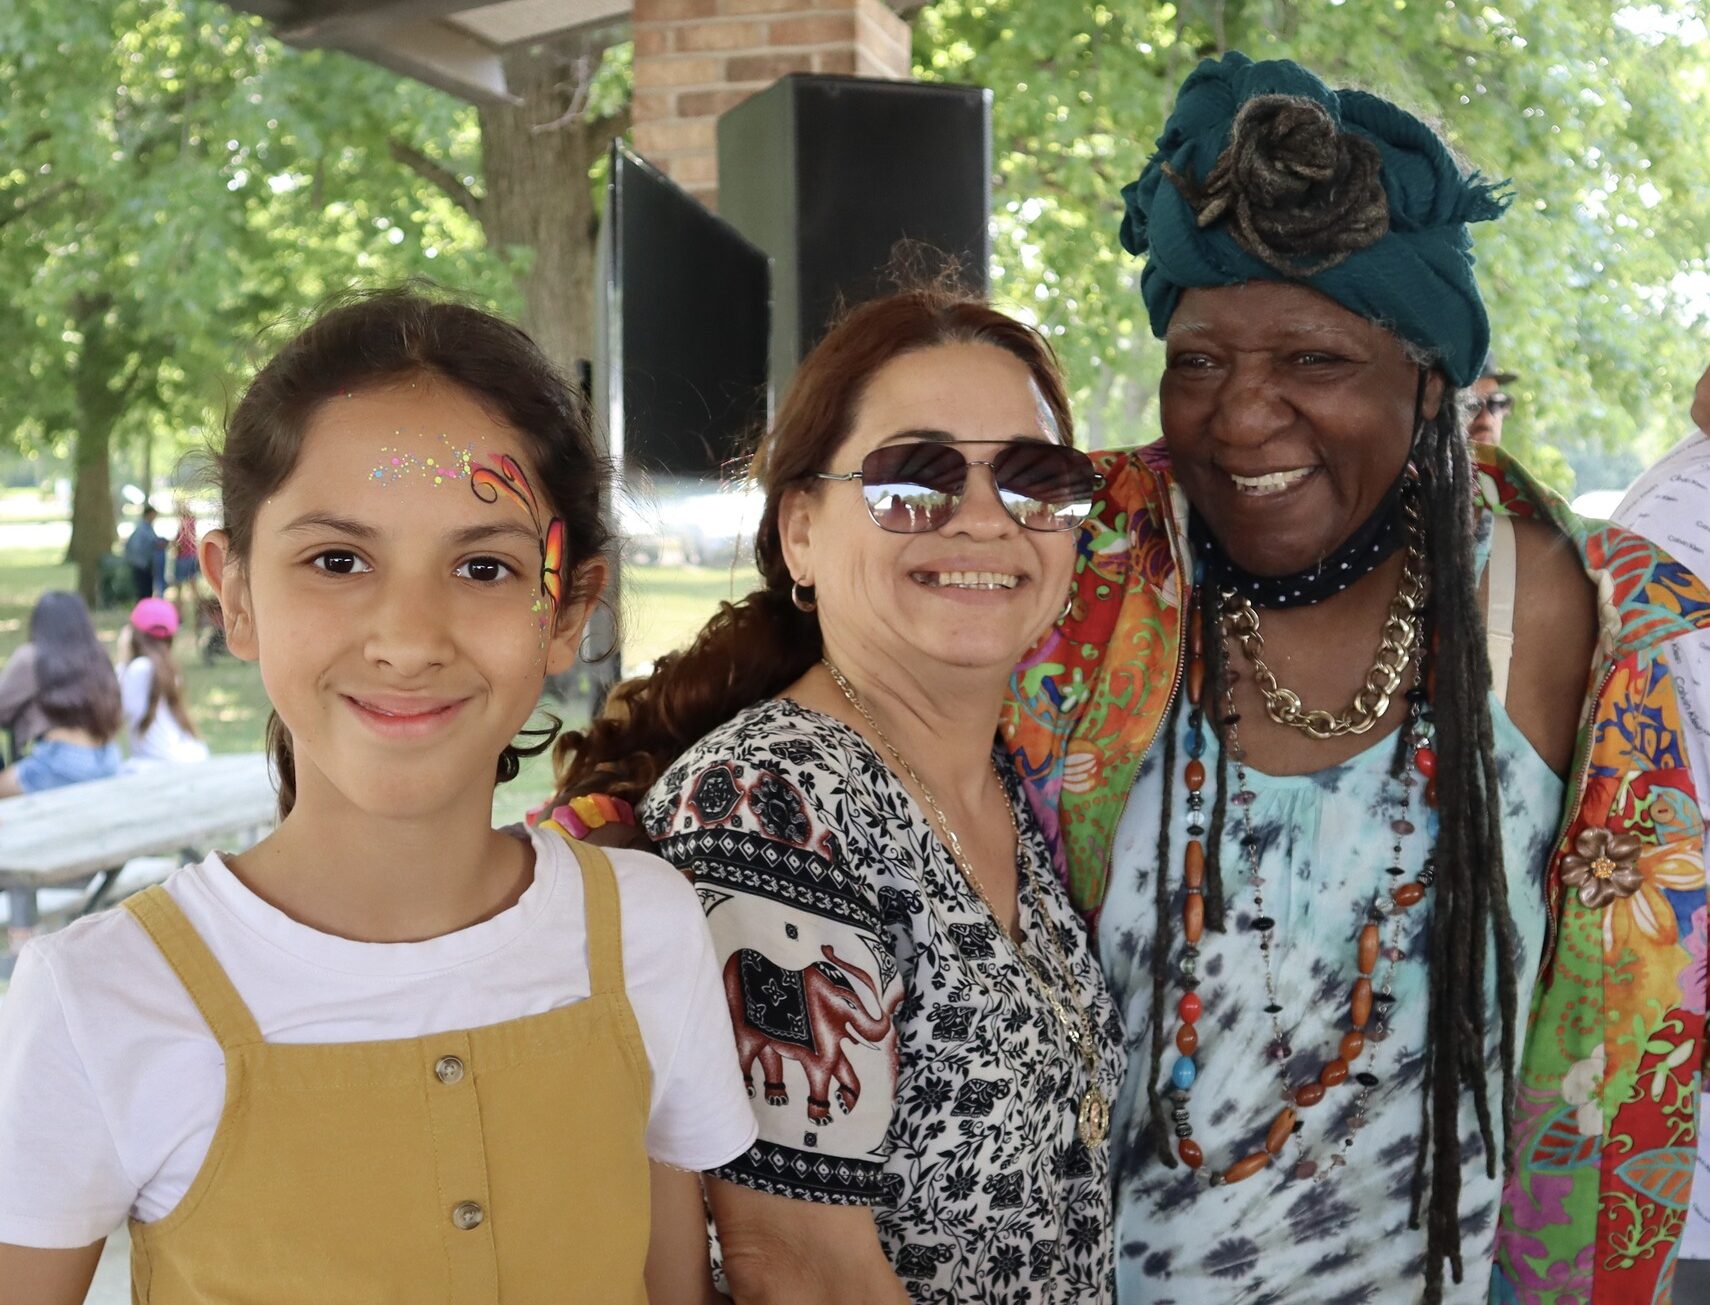 A Latina teenager, her mom, and an African-American grandmother pose for a photo at the Celebration of Hope picnic